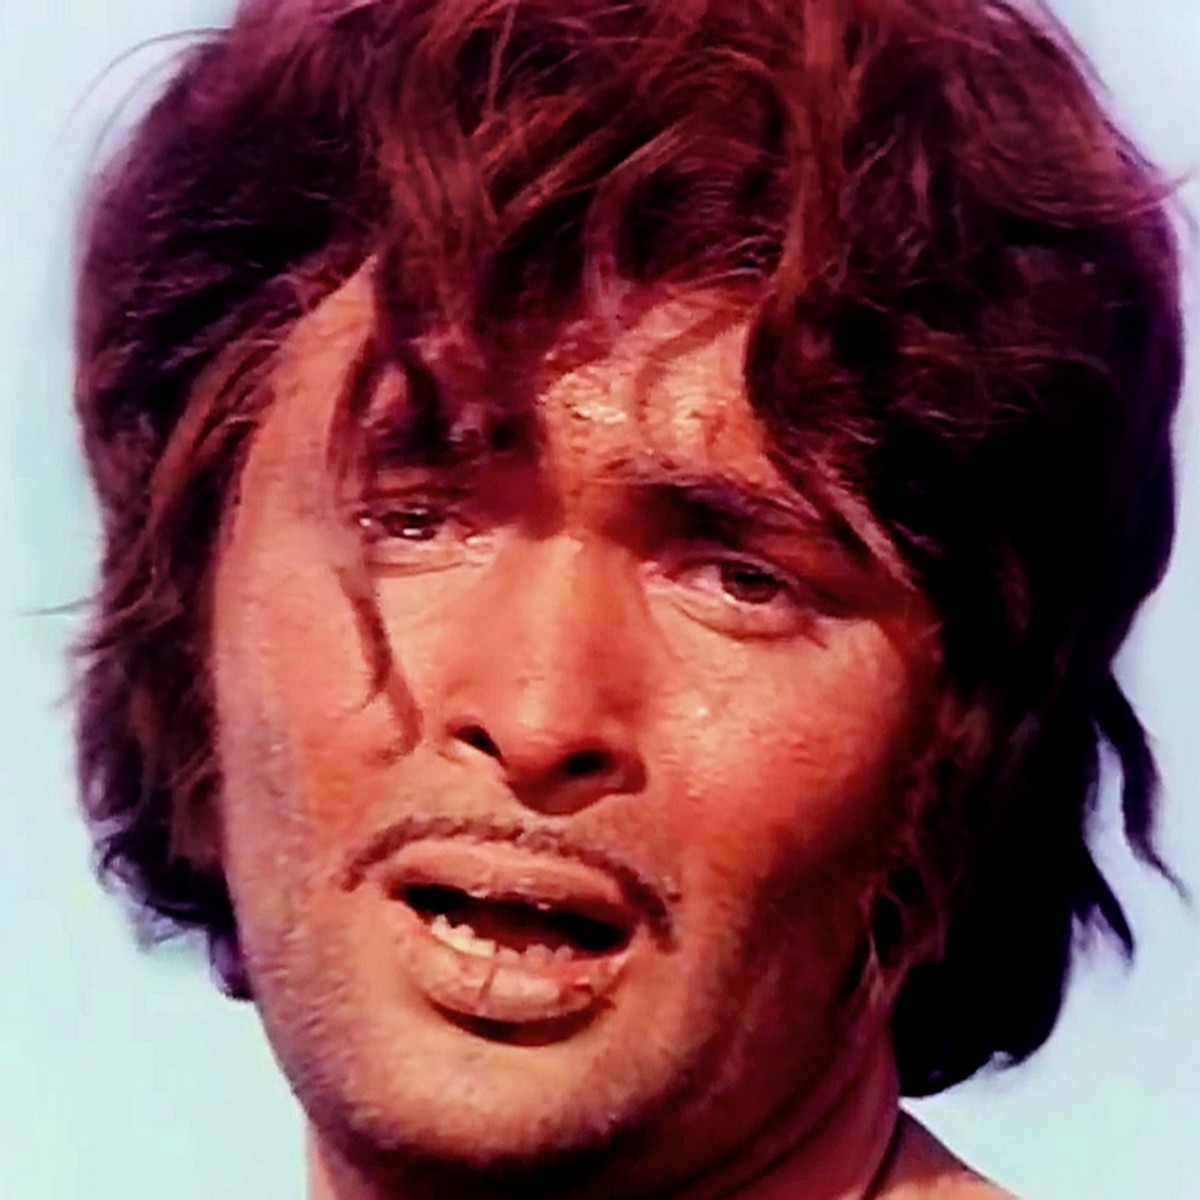 Rishi Kapoor in "Barbad-e-mohabbat ki dua sath liye ja..." from LAILA MAJNU (1976), one of the best songs of Rafi and one of best ever sad songs of Bollywood!